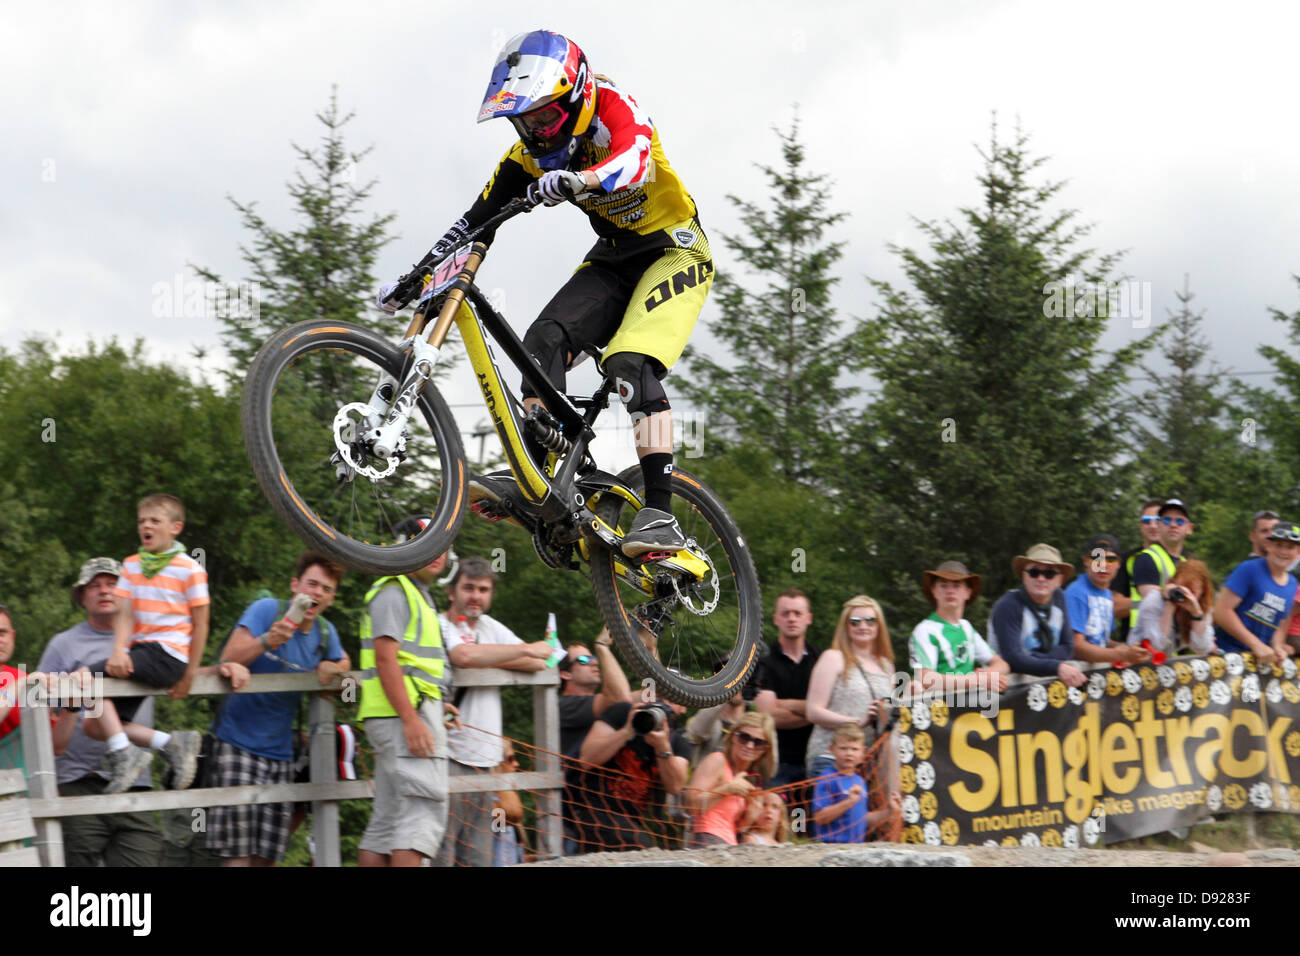 9th June 2013. Fort William, UK. Rachel Atherton jumping into the finishing arena to win Sunday's Downhill Mountain Bike World Cup at Fort William, Scotland. Credit:  Malcolm Gallon/Alamy Live News Stock Photo